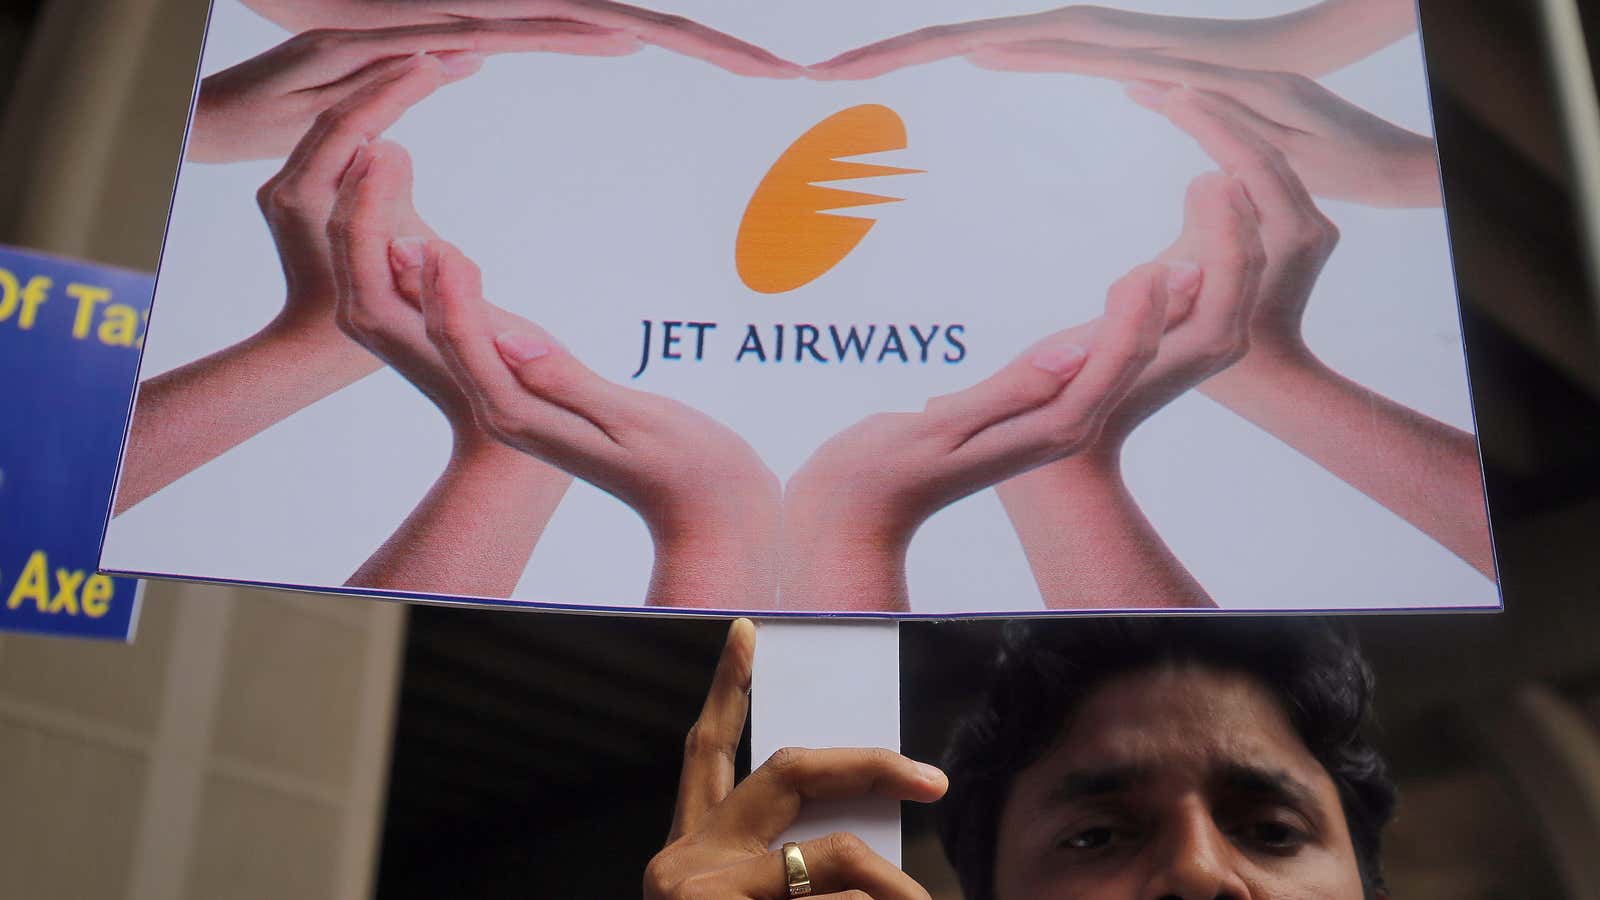 Will Jet Airways ever fly again?